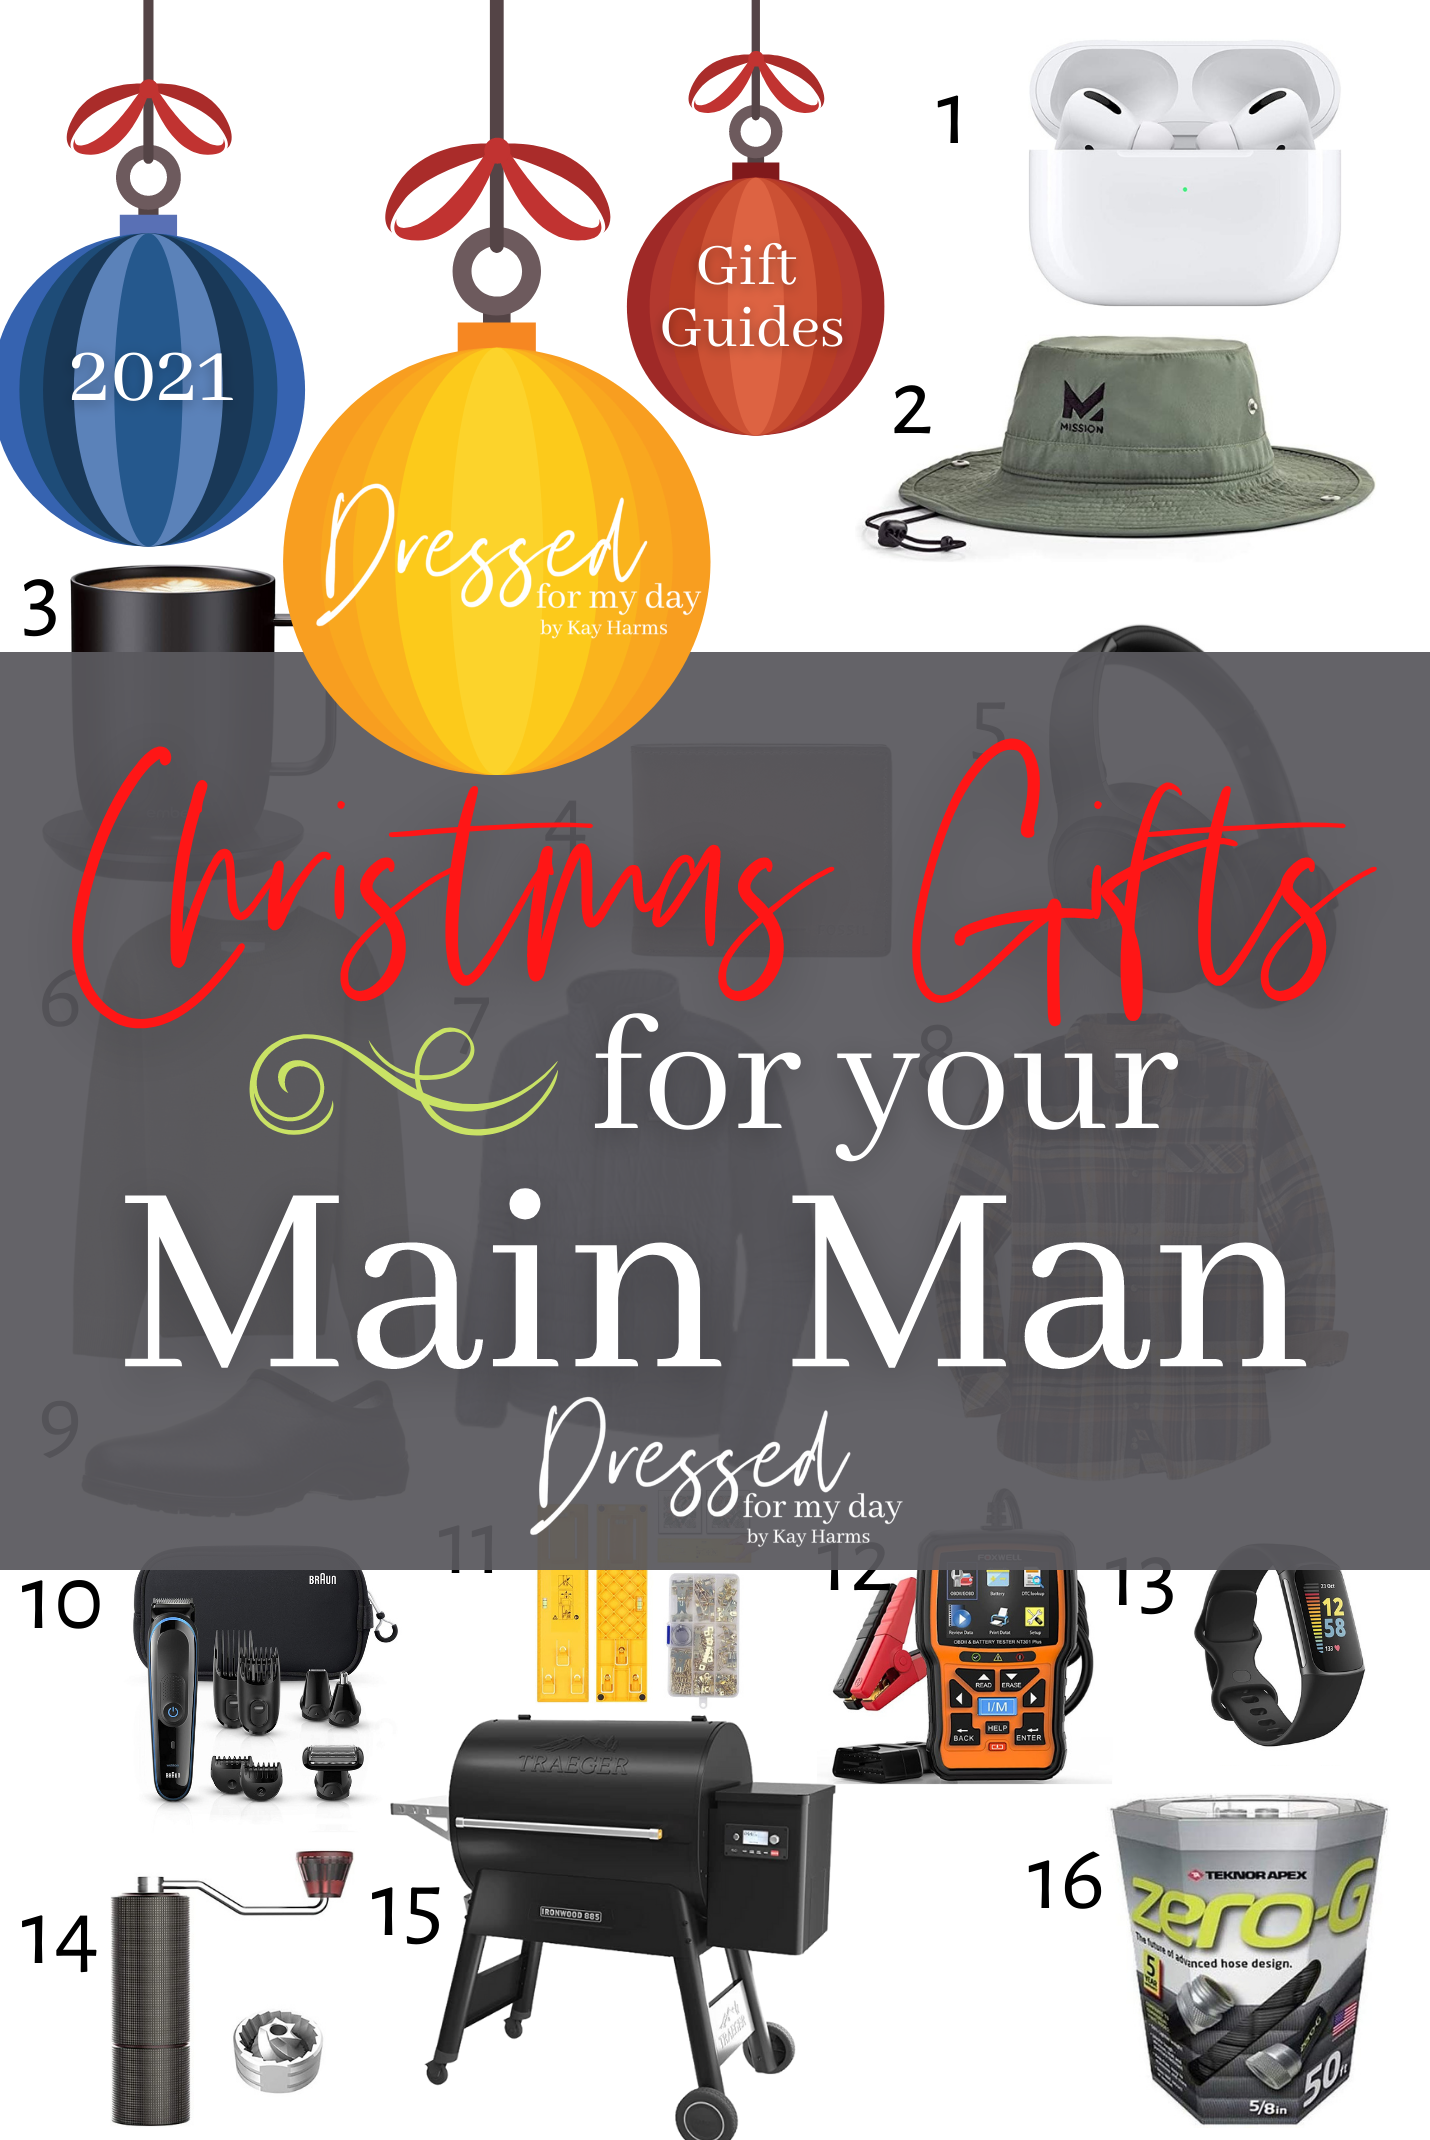 Christmas Gifts for Your MAIN MAN